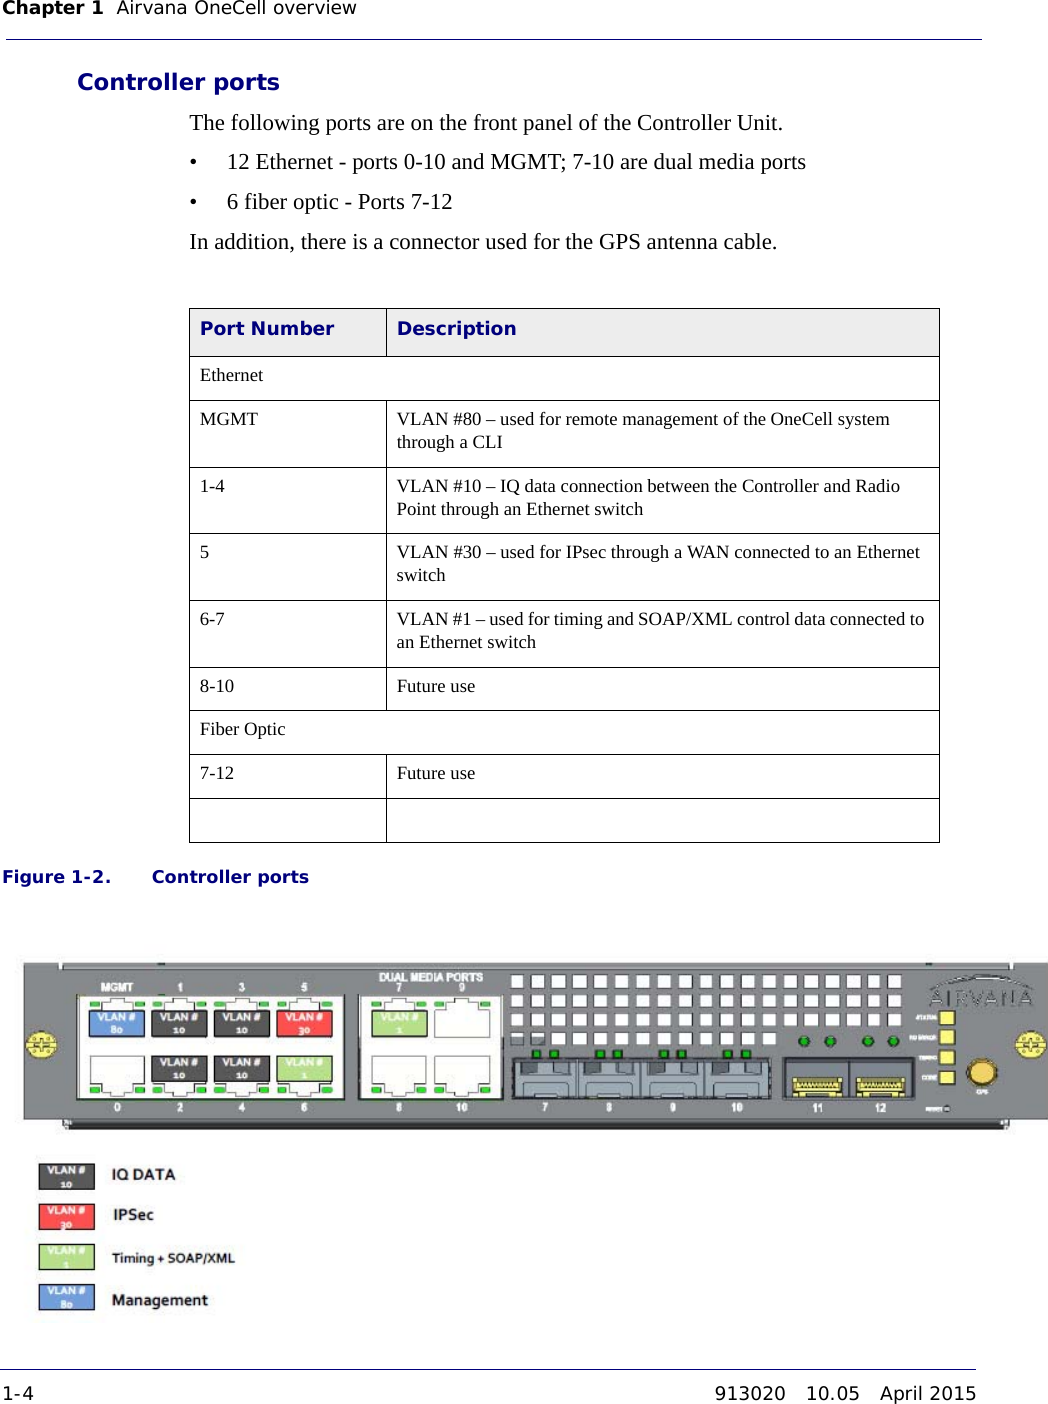 Chapter 1 Airvana OneCell overview 1-4 913020 10.05 April 2015DRAFTController portsThe following ports are on the front panel of the Controller Unit.• 12 Ethernet - ports 0-10 and MGMT; 7-10 are dual media ports• 6 fiber optic - Ports 7-12In addition, there is a connector used for the GPS antenna cable. Figure 1-2. Controller portsPort Number DescriptionEthernetMGMT VLAN #80 – used for remote management of the OneCell system through a CLI1-4 VLAN #10 – IQ data connection between the Controller and Radio Point through an Ethernet switch 5 VLAN #30 – used for IPsec through a WAN connected to an Ethernet switch6-7 VLAN #1 – used for timing and SOAP/XML control data connected to an Ethernet switch8-10 Future useFiber Optic7-12 Future use